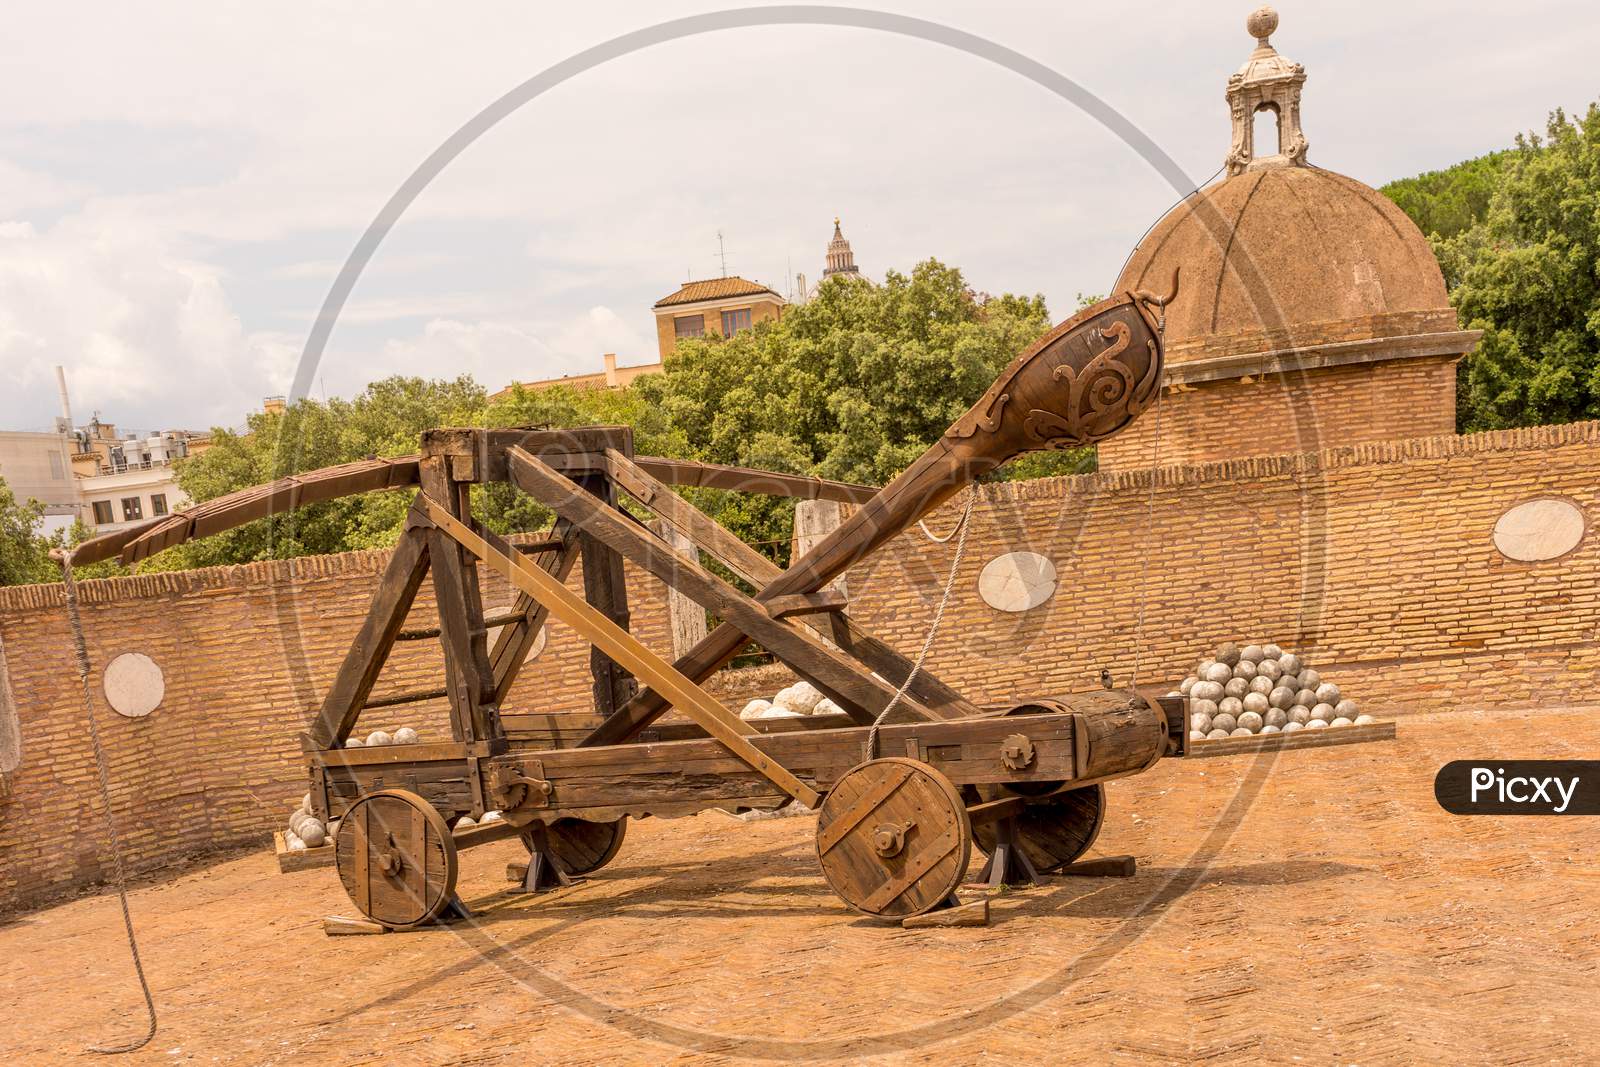 Rome, Italy - 23 June 2018: Ancient Catapult Weapon With Cannon Balls At The Castel Sant Angelo, Mausoleum Of Hadrian In Rome, Italy